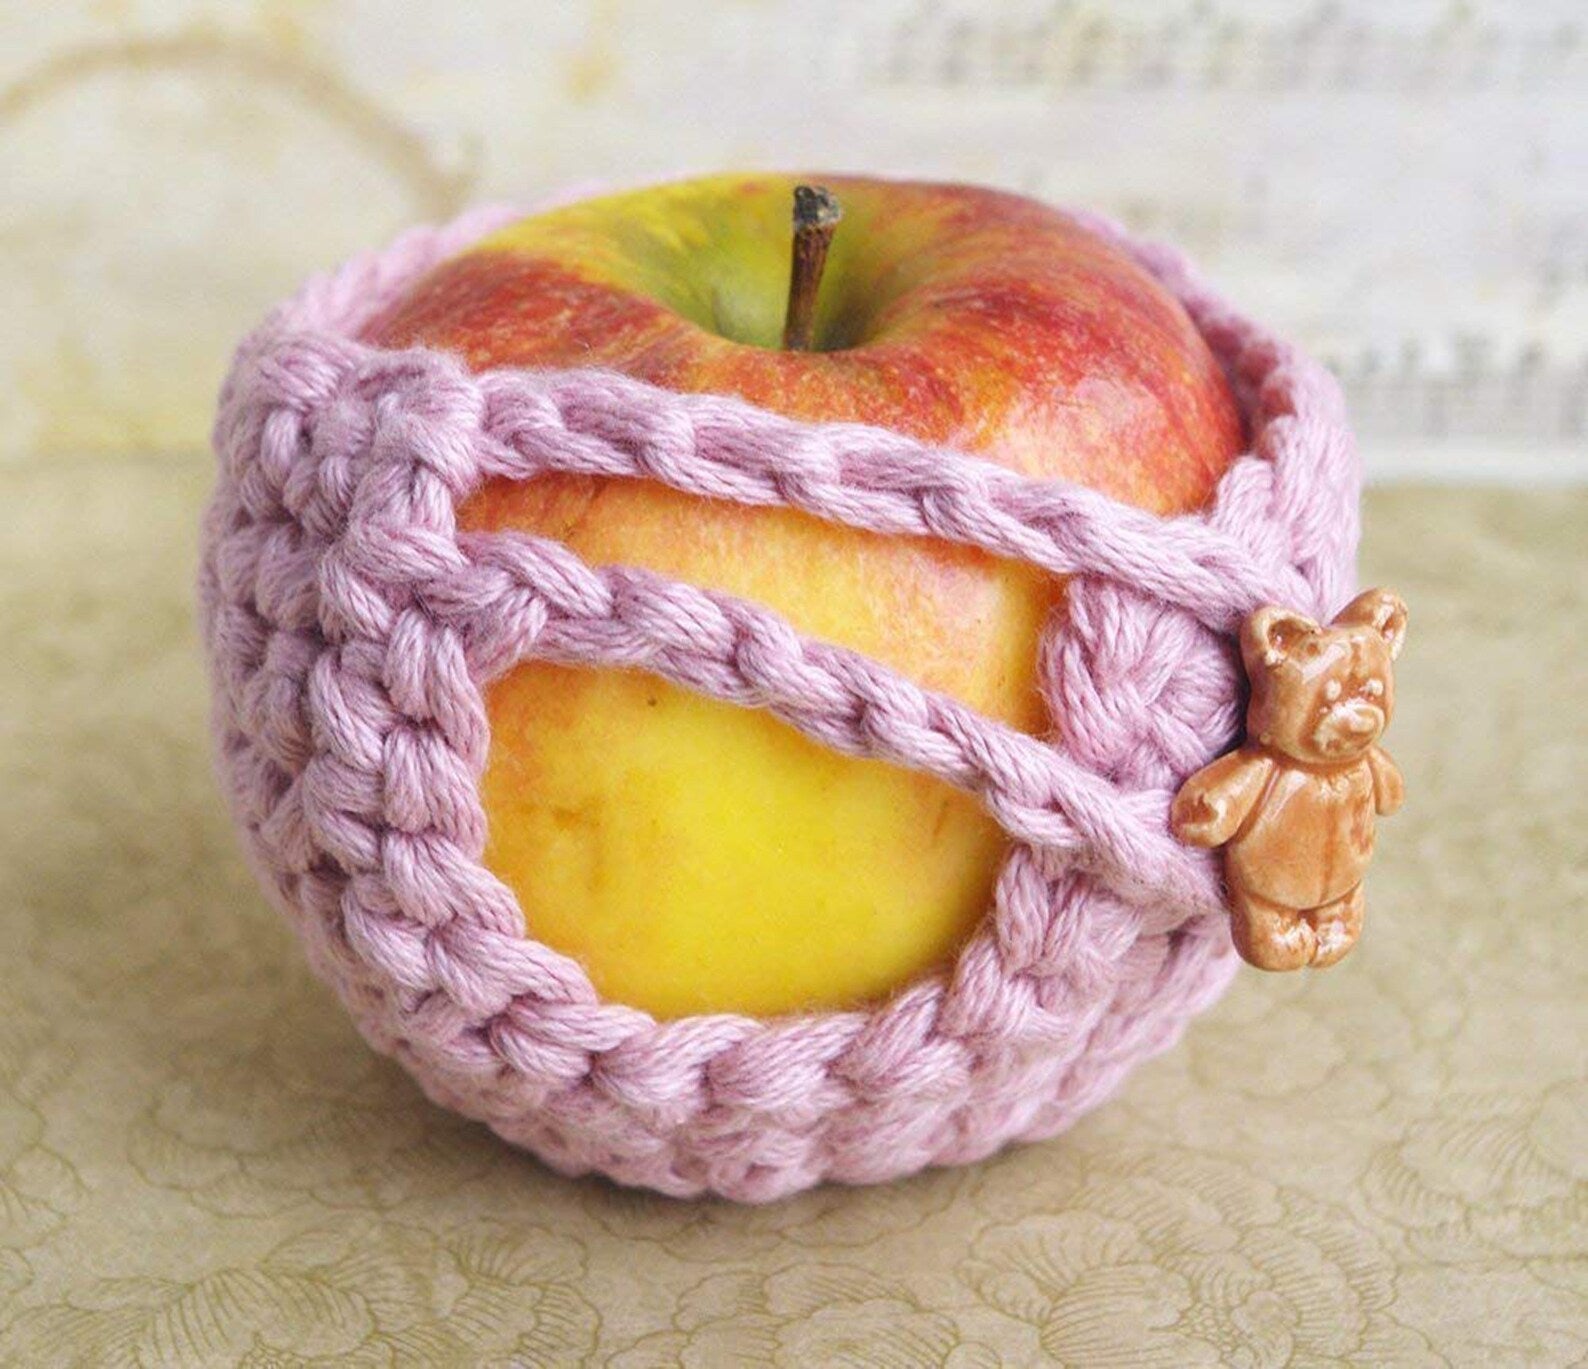 Pink Cozy Apple Bag - Handmade Crochet Cover - Zero Waste Gift - Bear button - Cute and convenient